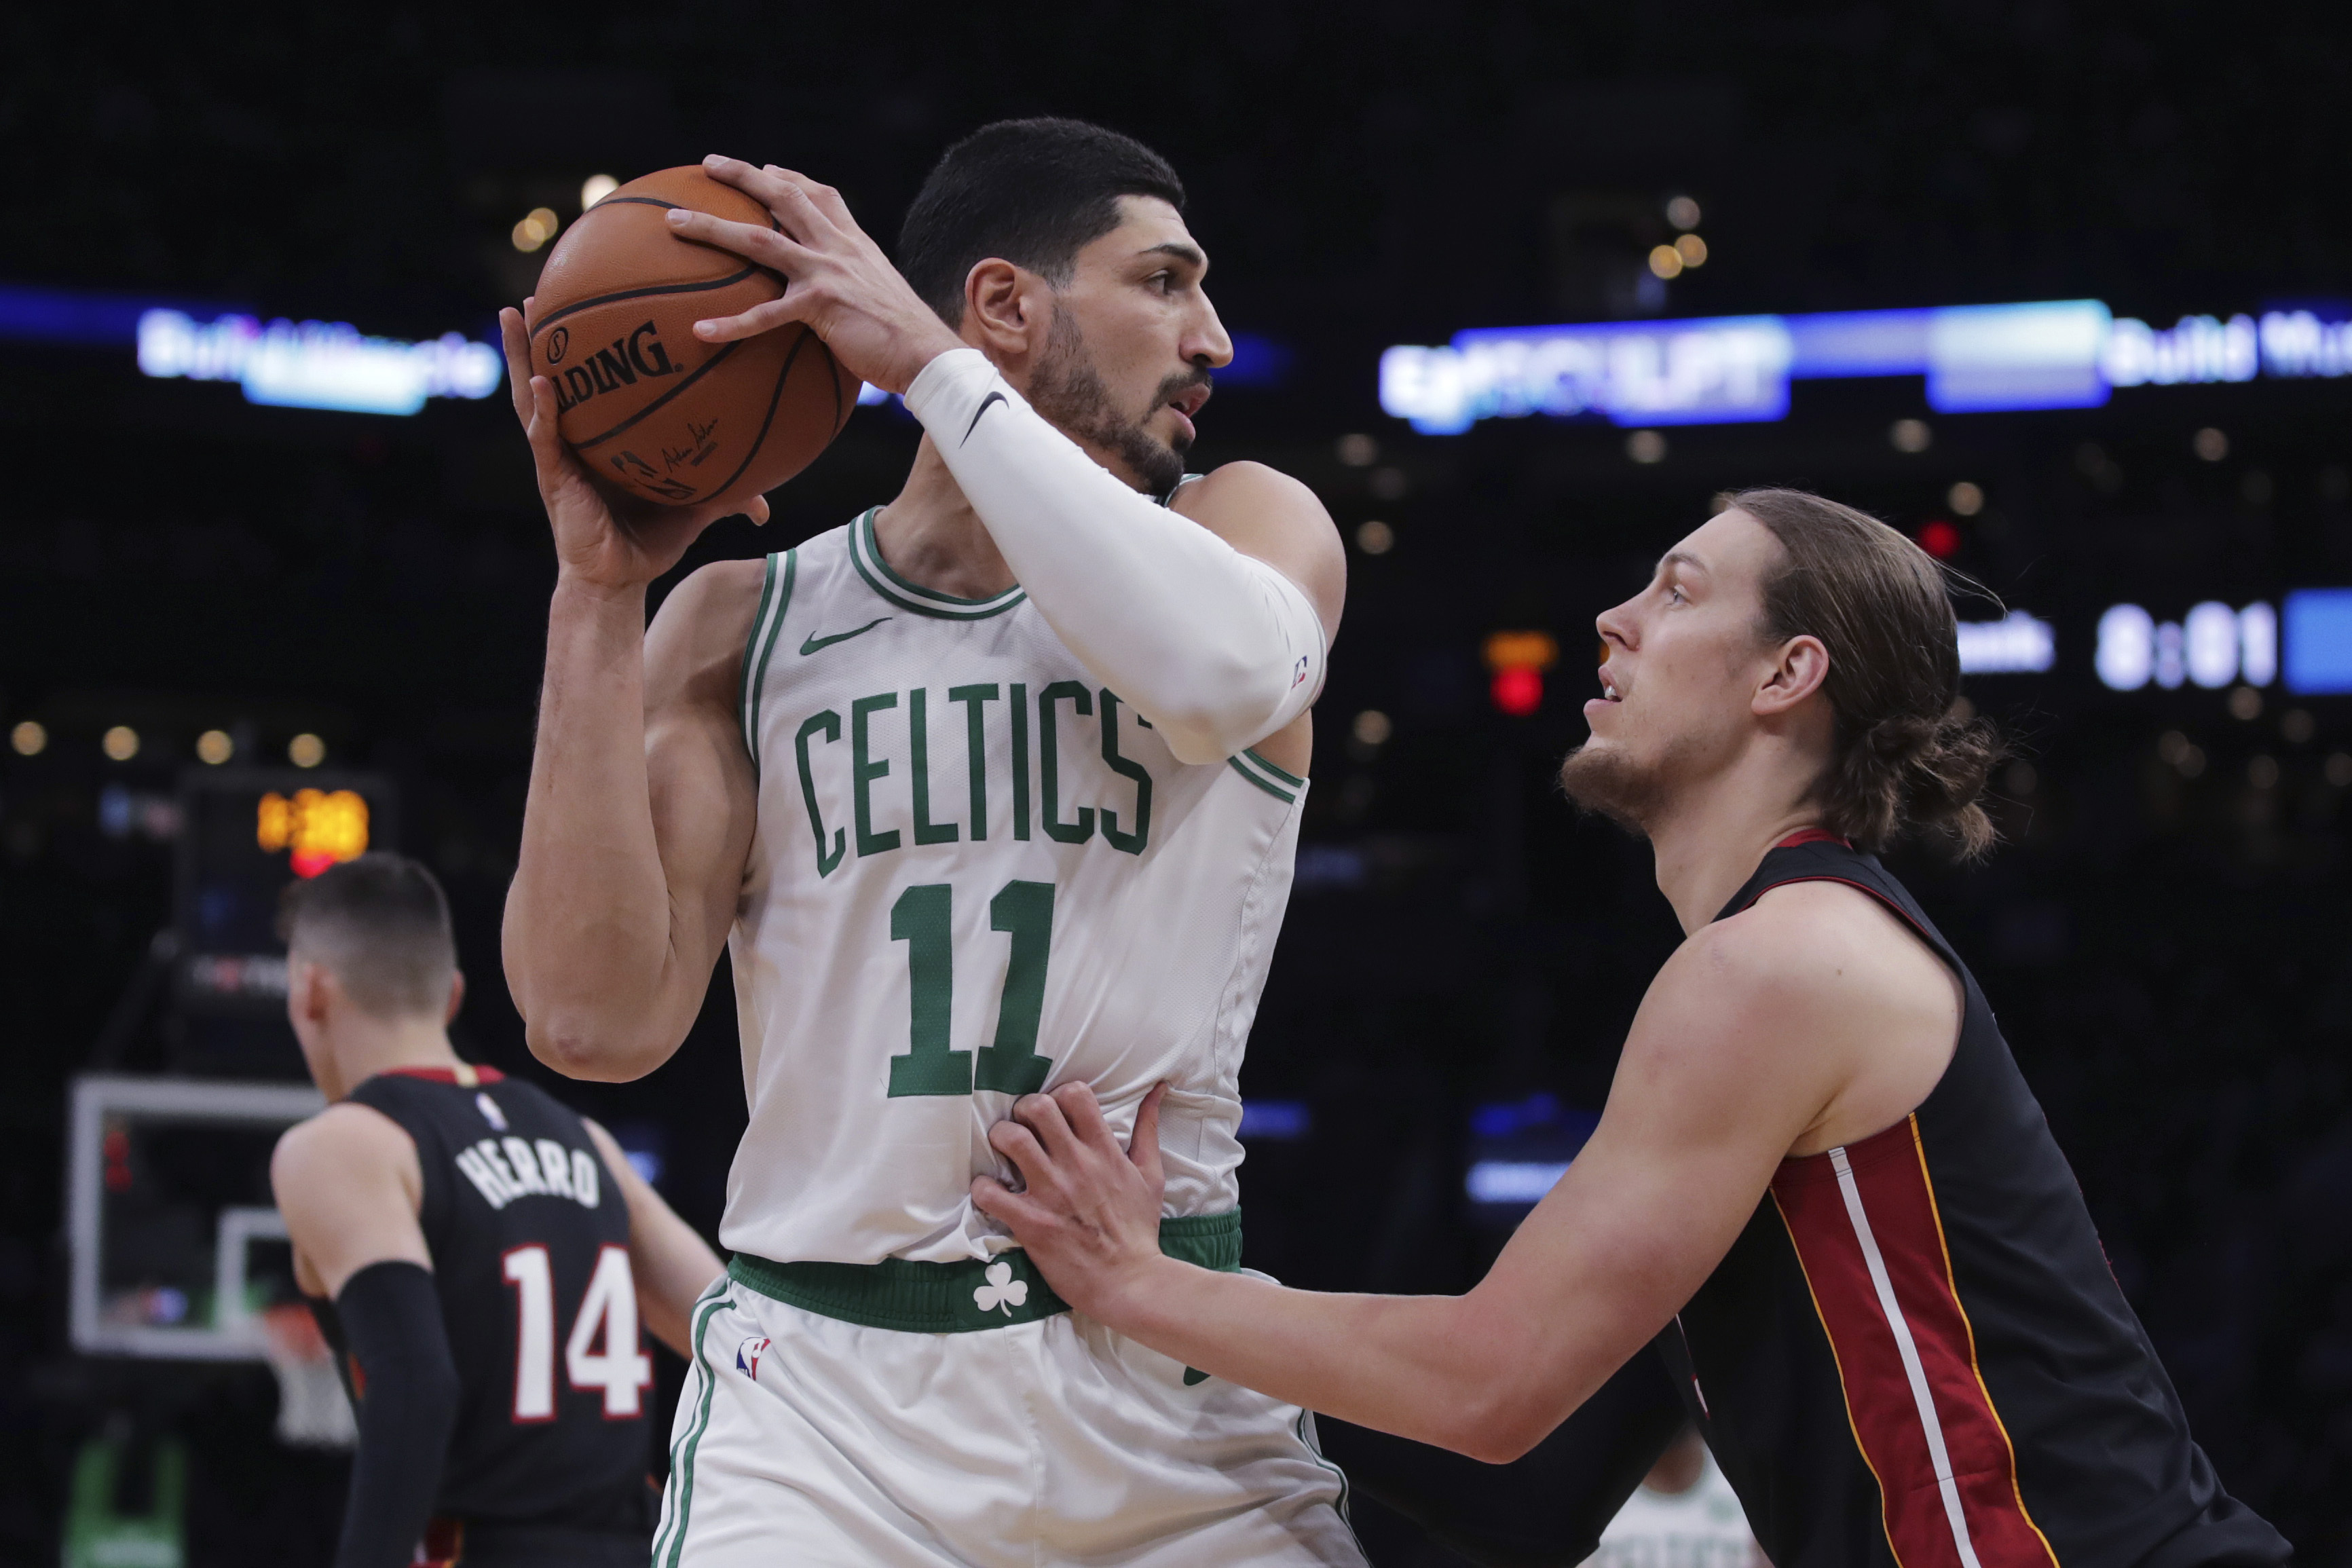 Celtics' Kanter thanks Trudeau for chance to play in Canada